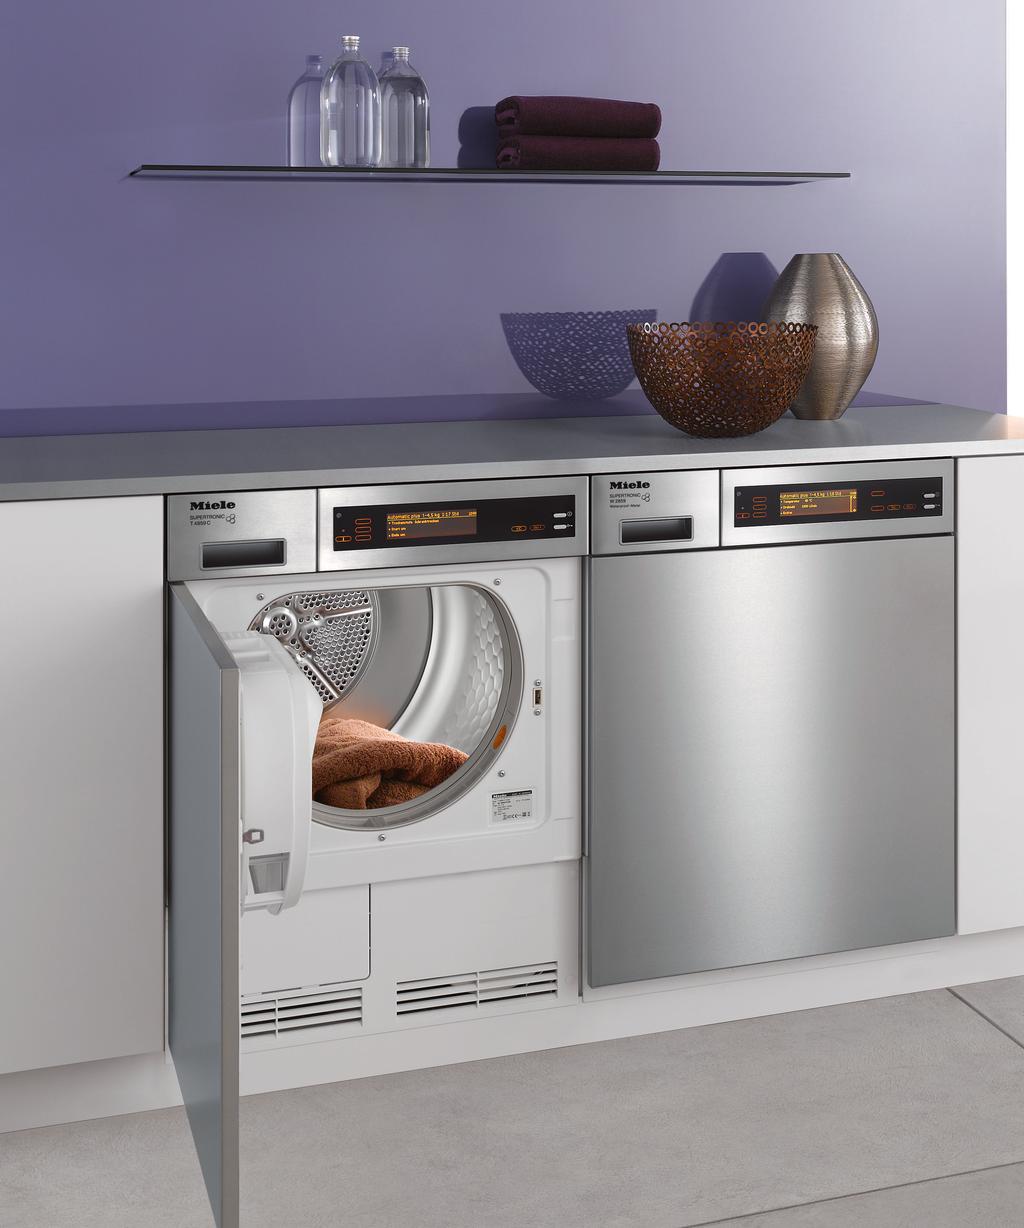 Perfect drying results with tumble dryers from Miele Miele tumble dryers offer programmes to complement those on the matching washing machines together with a host of features designed to